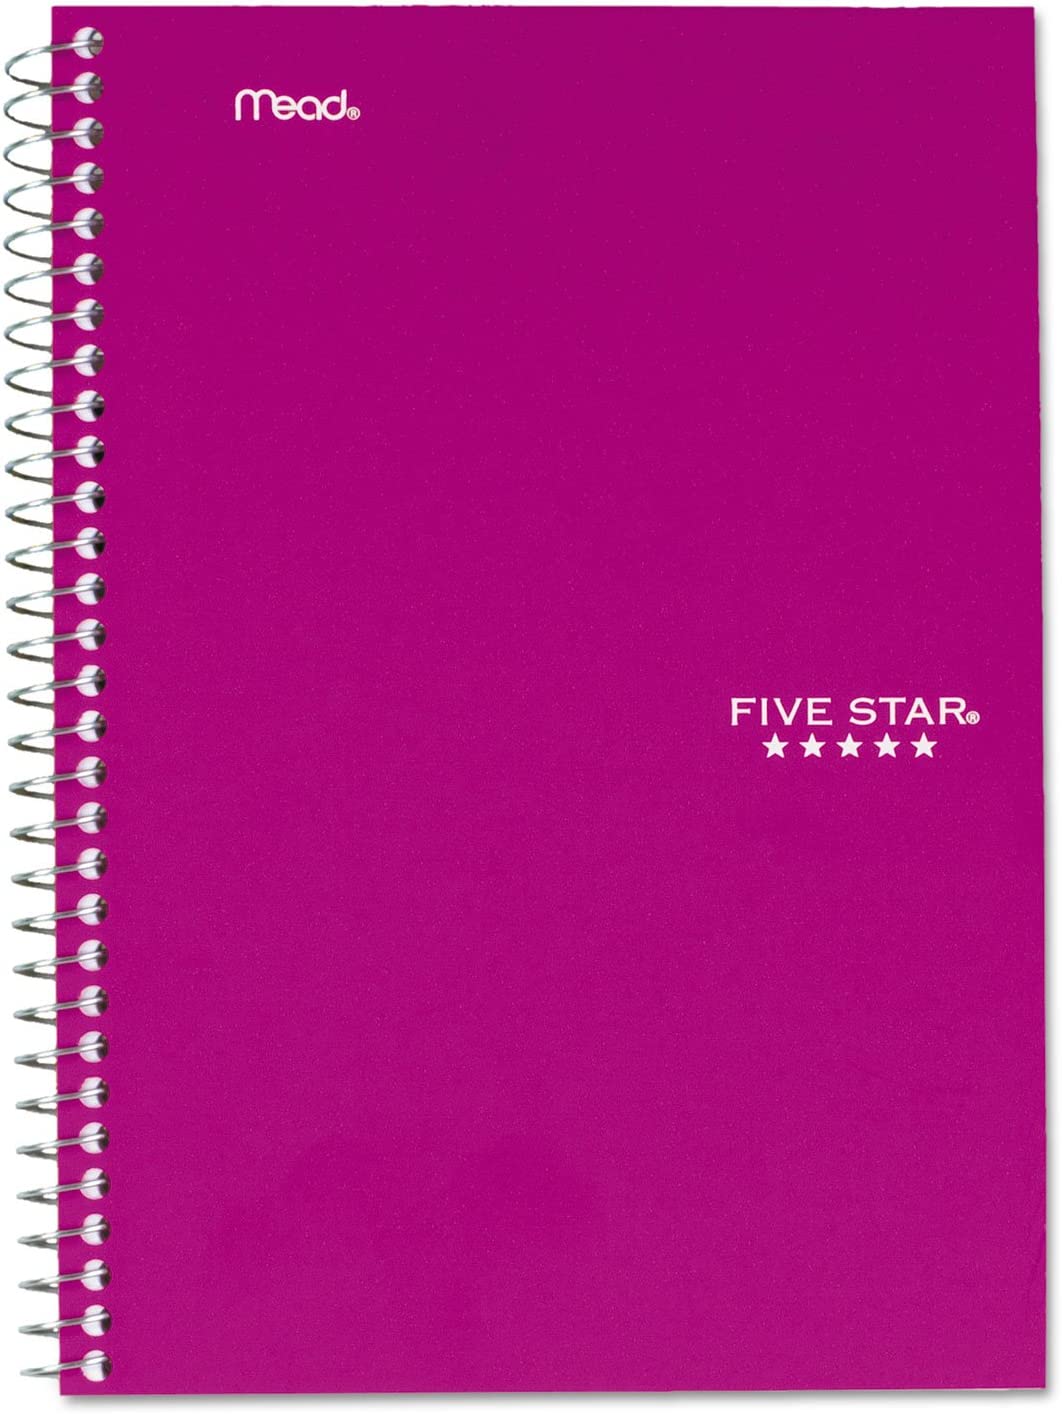 Mead Five Star Spiral Notebook, College Ruled, 2 Subject